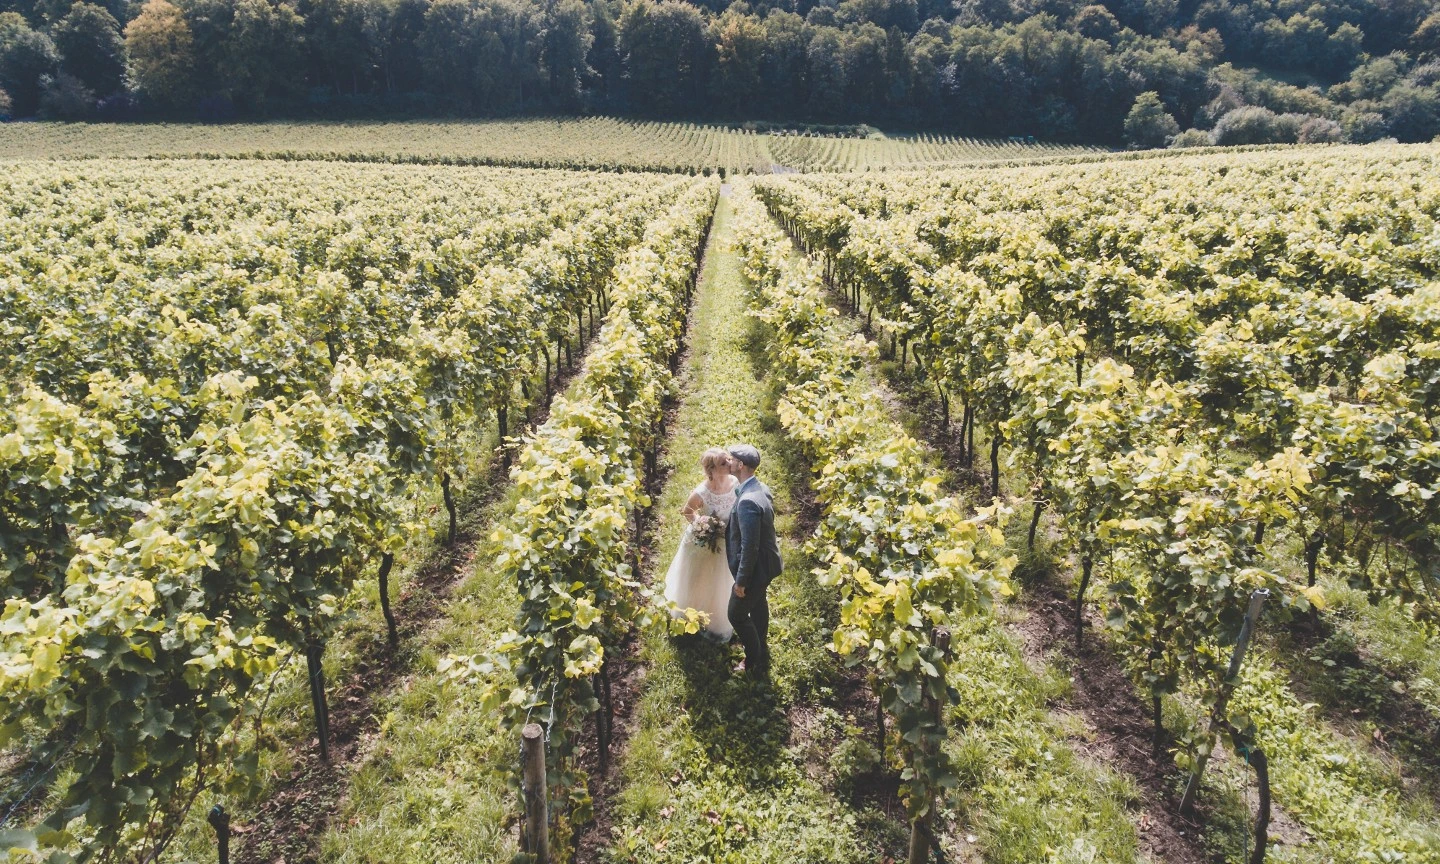 bride and groom kissing in the vineyard. Photo by marc a sporys via unsplash